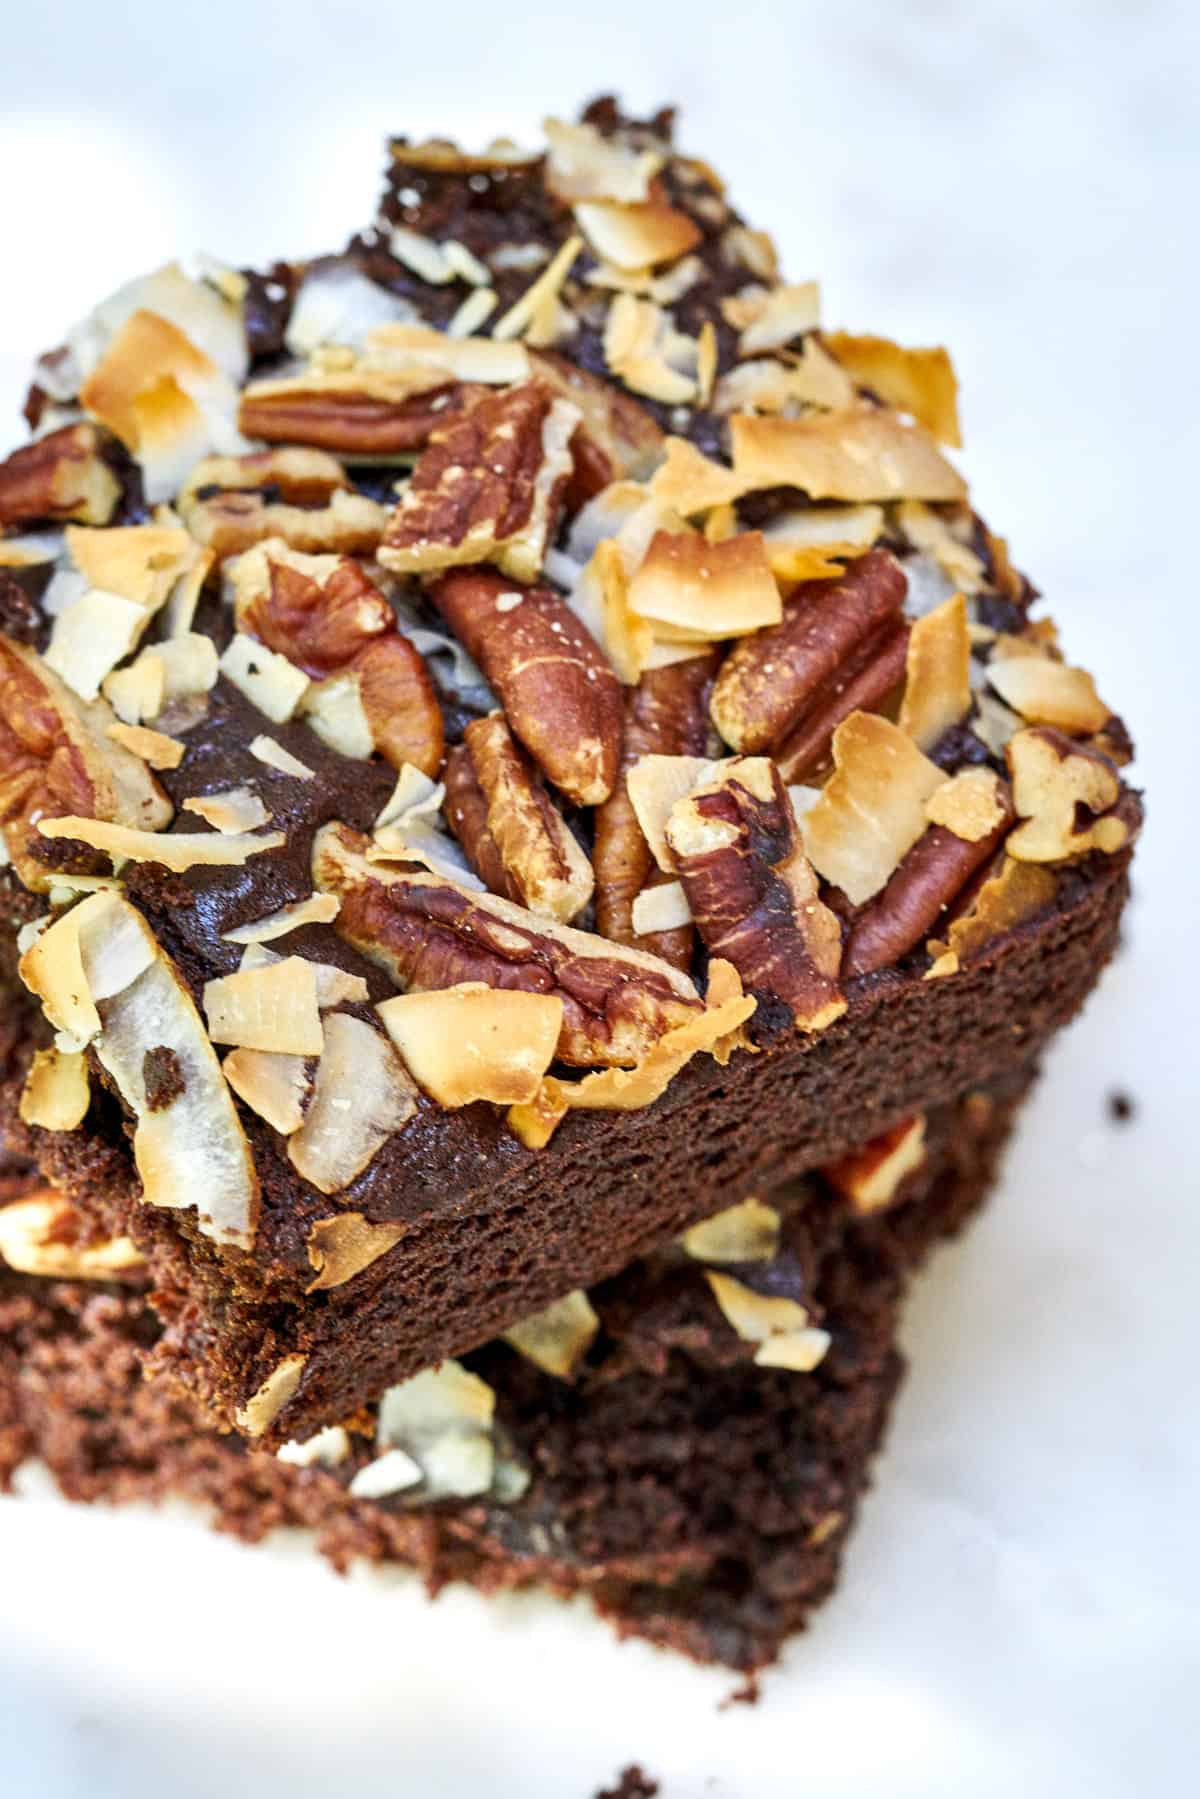 Two pieces of chocolate cake with coconut and nuts stacked on top of each other.